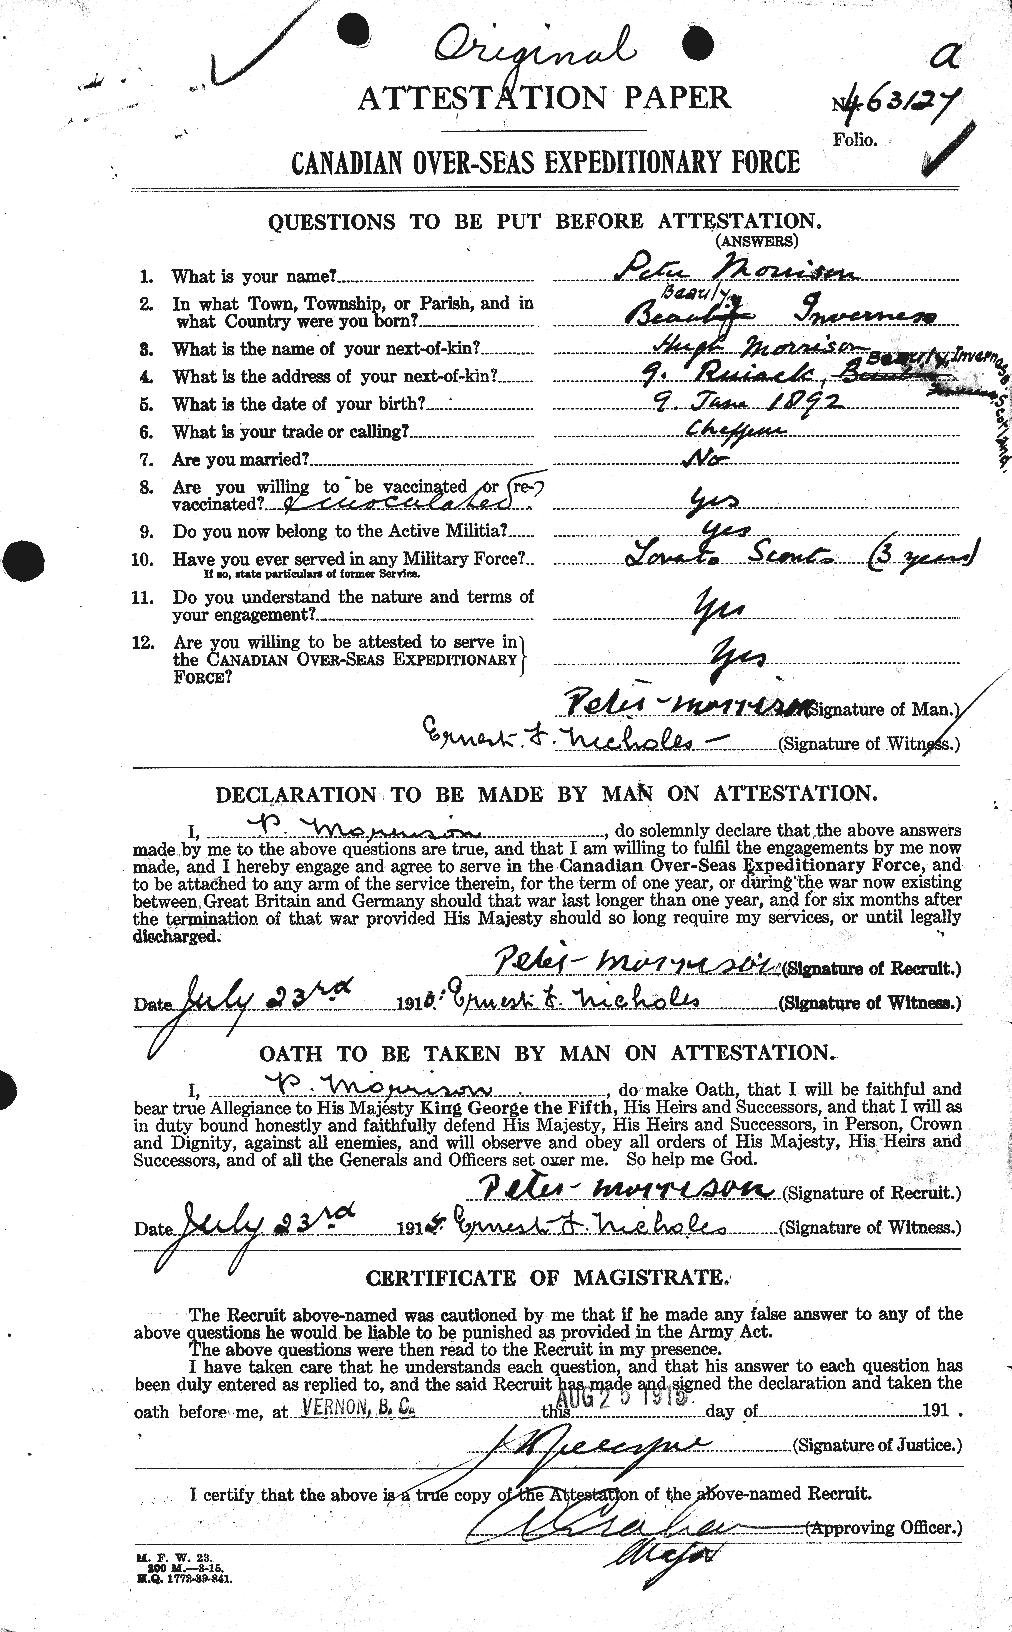 Personnel Records of the First World War - CEF 509060a